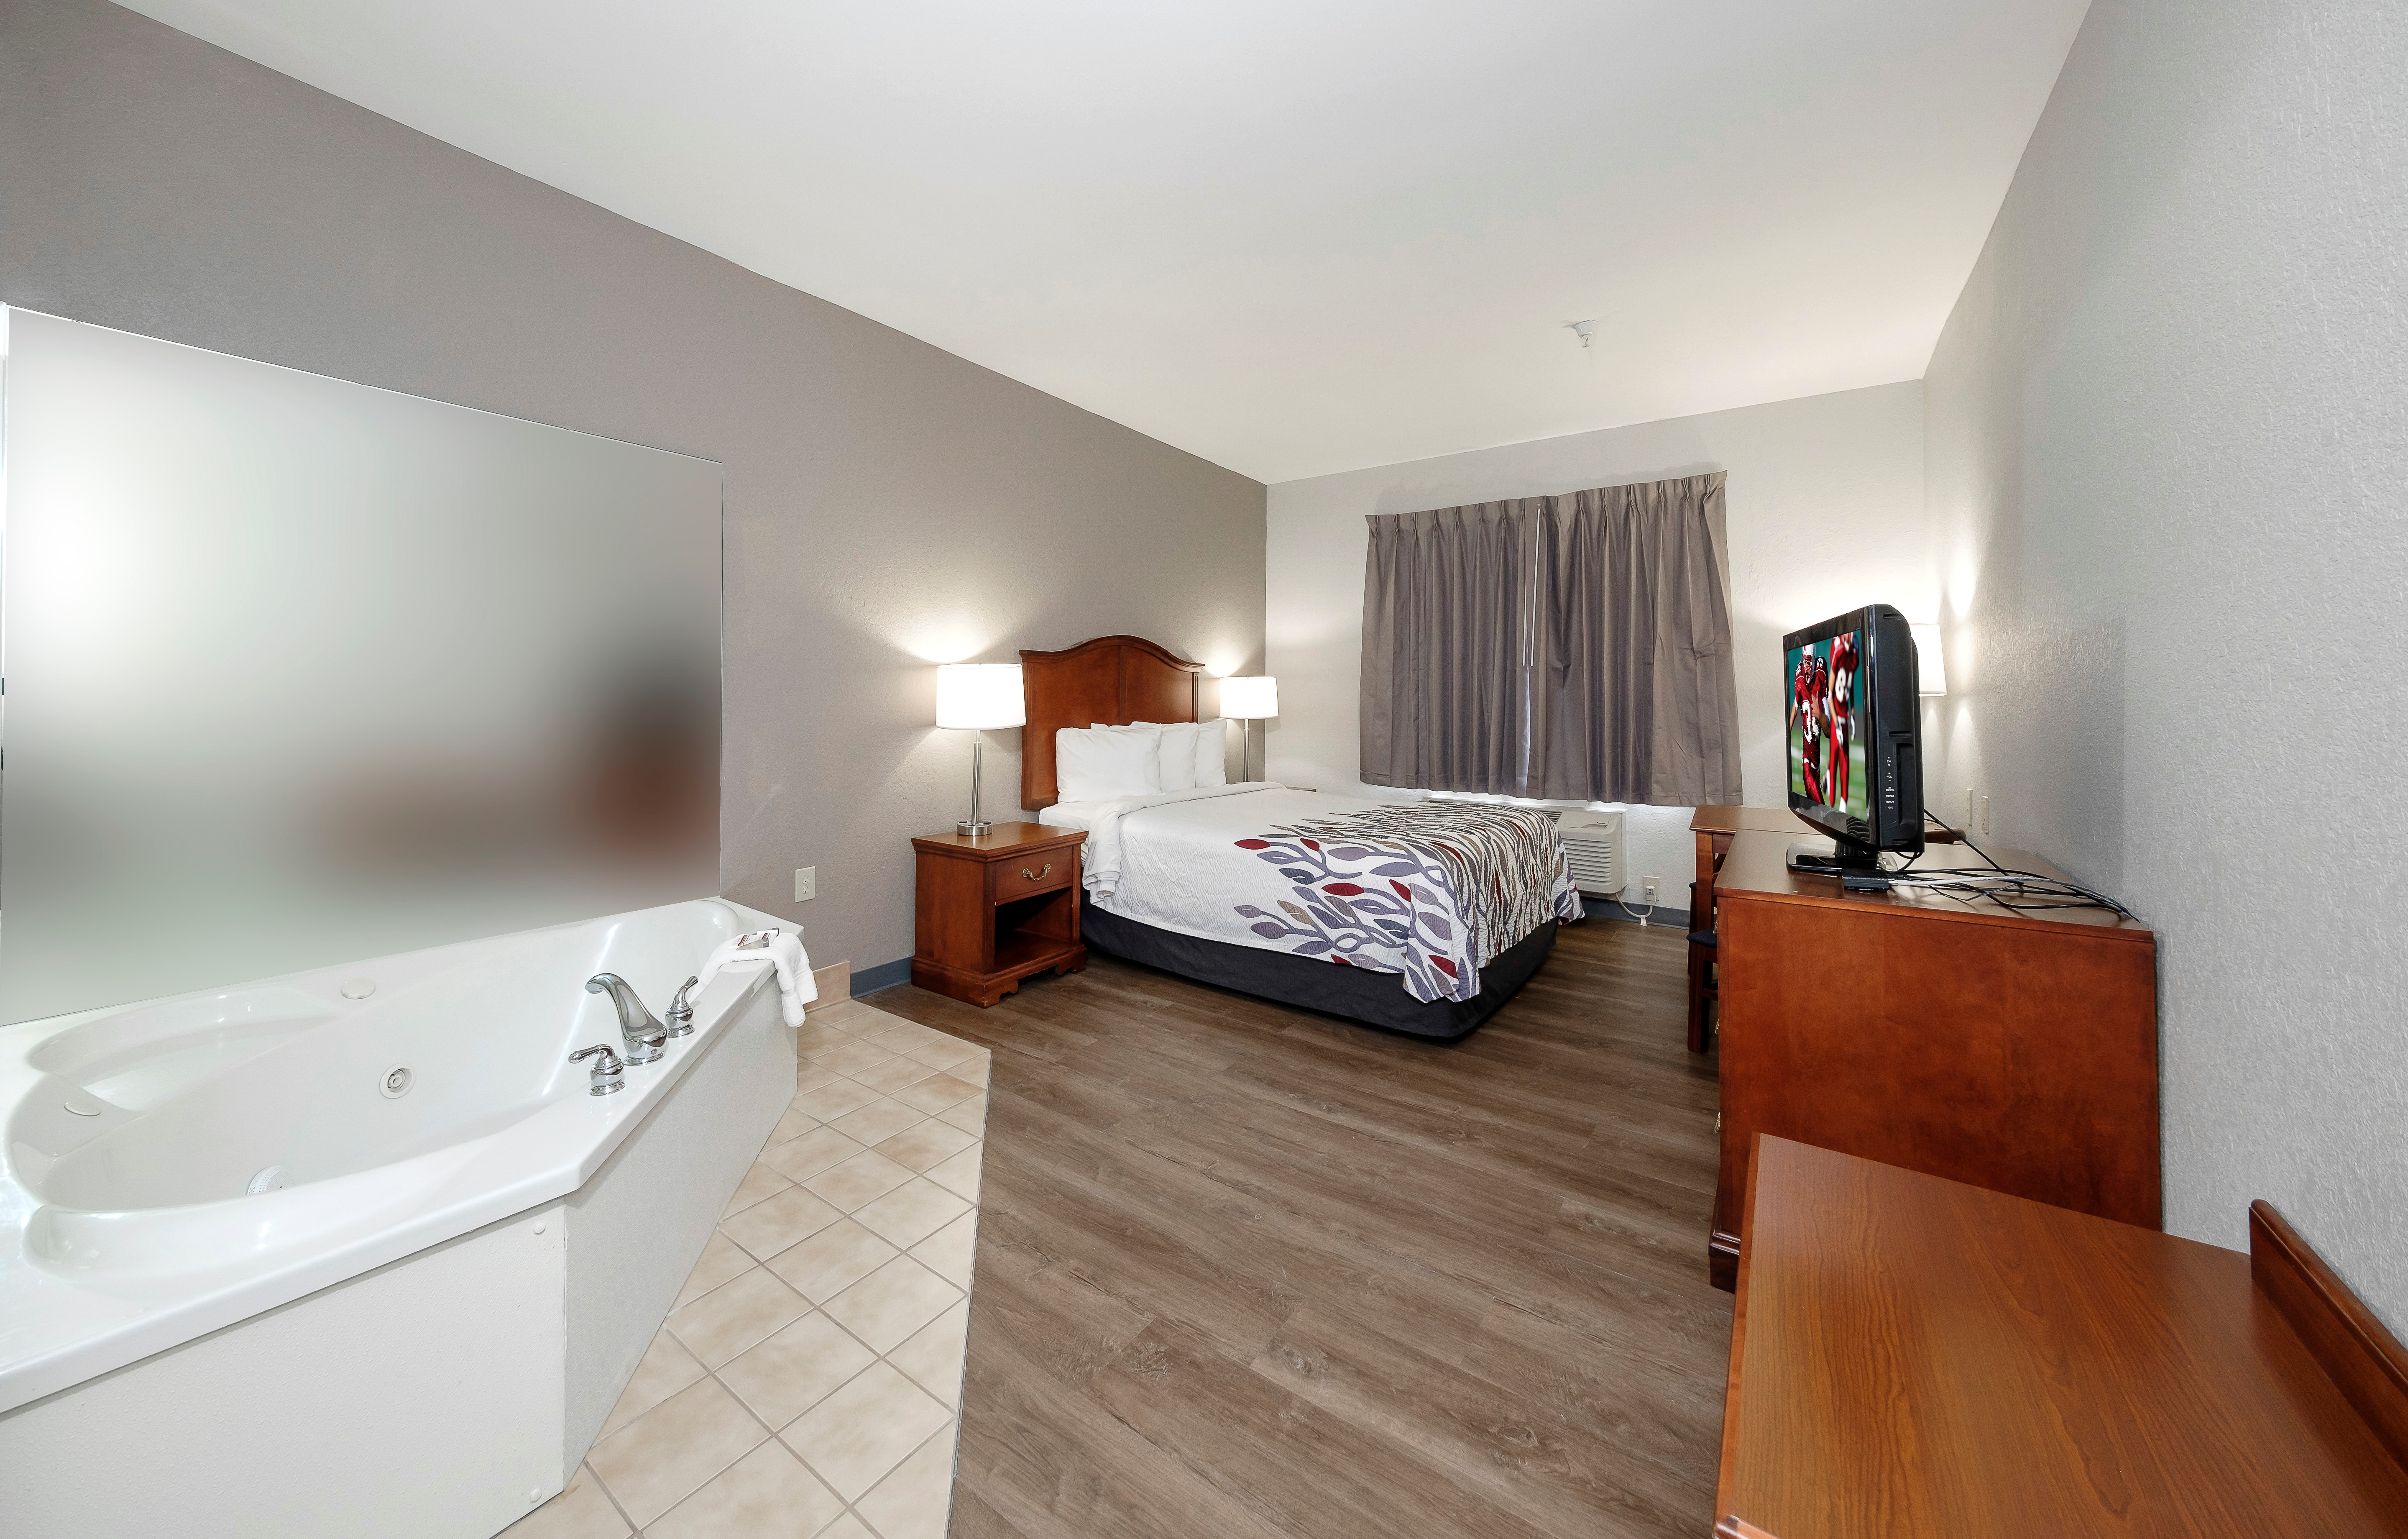 1174-suite-queen-bed-jetted-tub.jpg